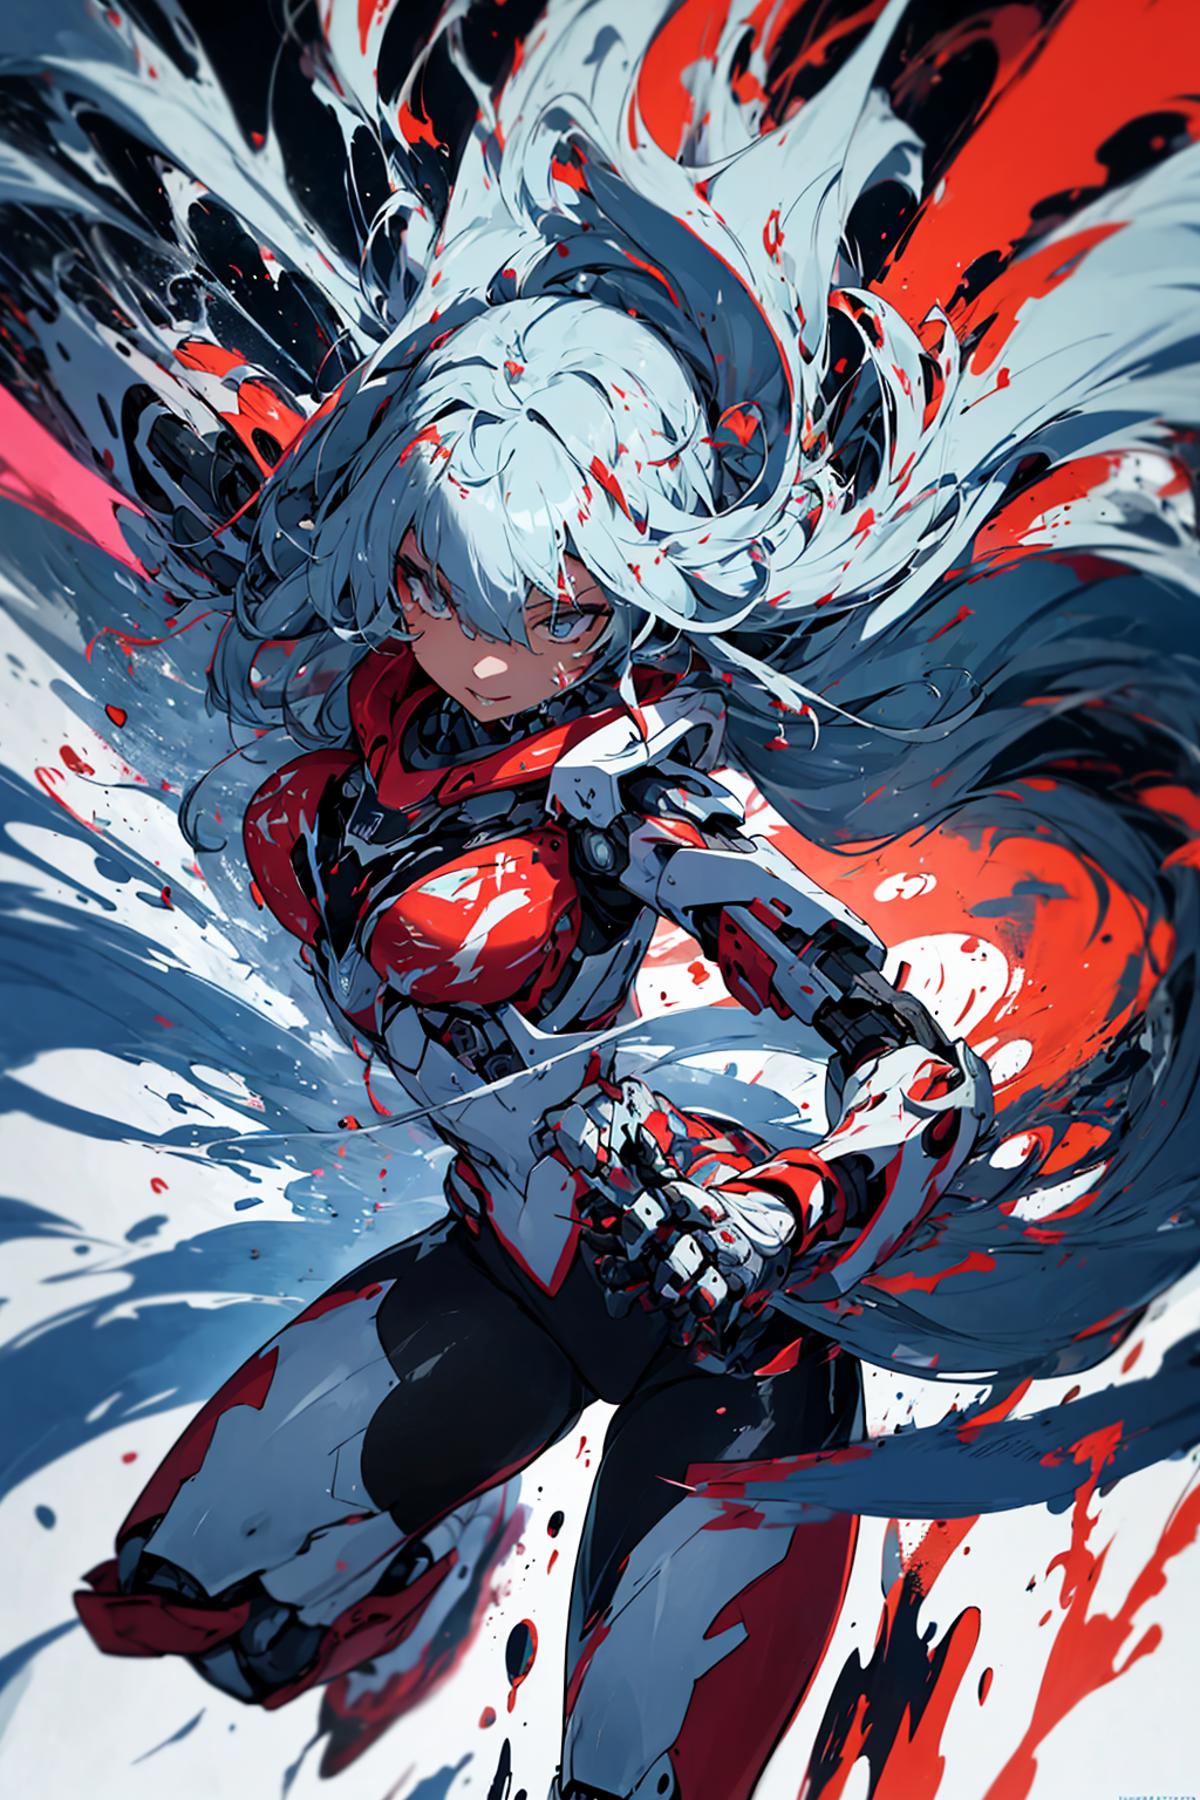 A colorful drawing of a woman with blonde hair, holding a sword and surrounded by a splash of red paint.